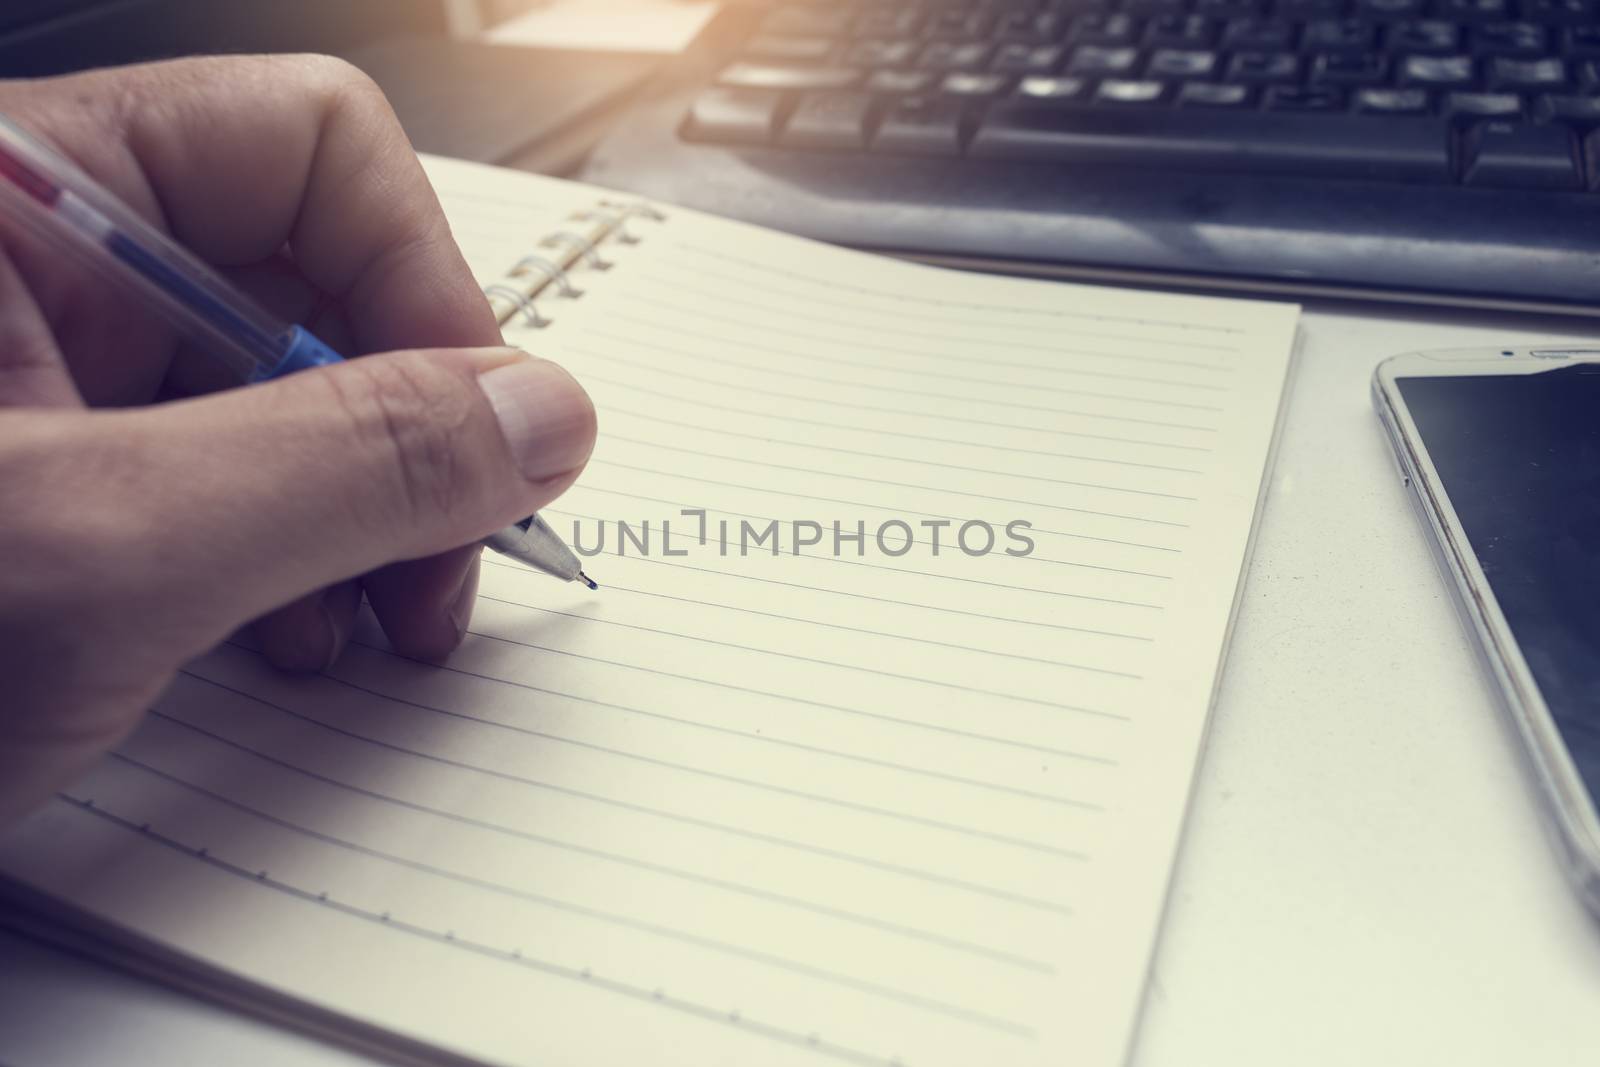 male hand writing in notebook with pen,
left hand